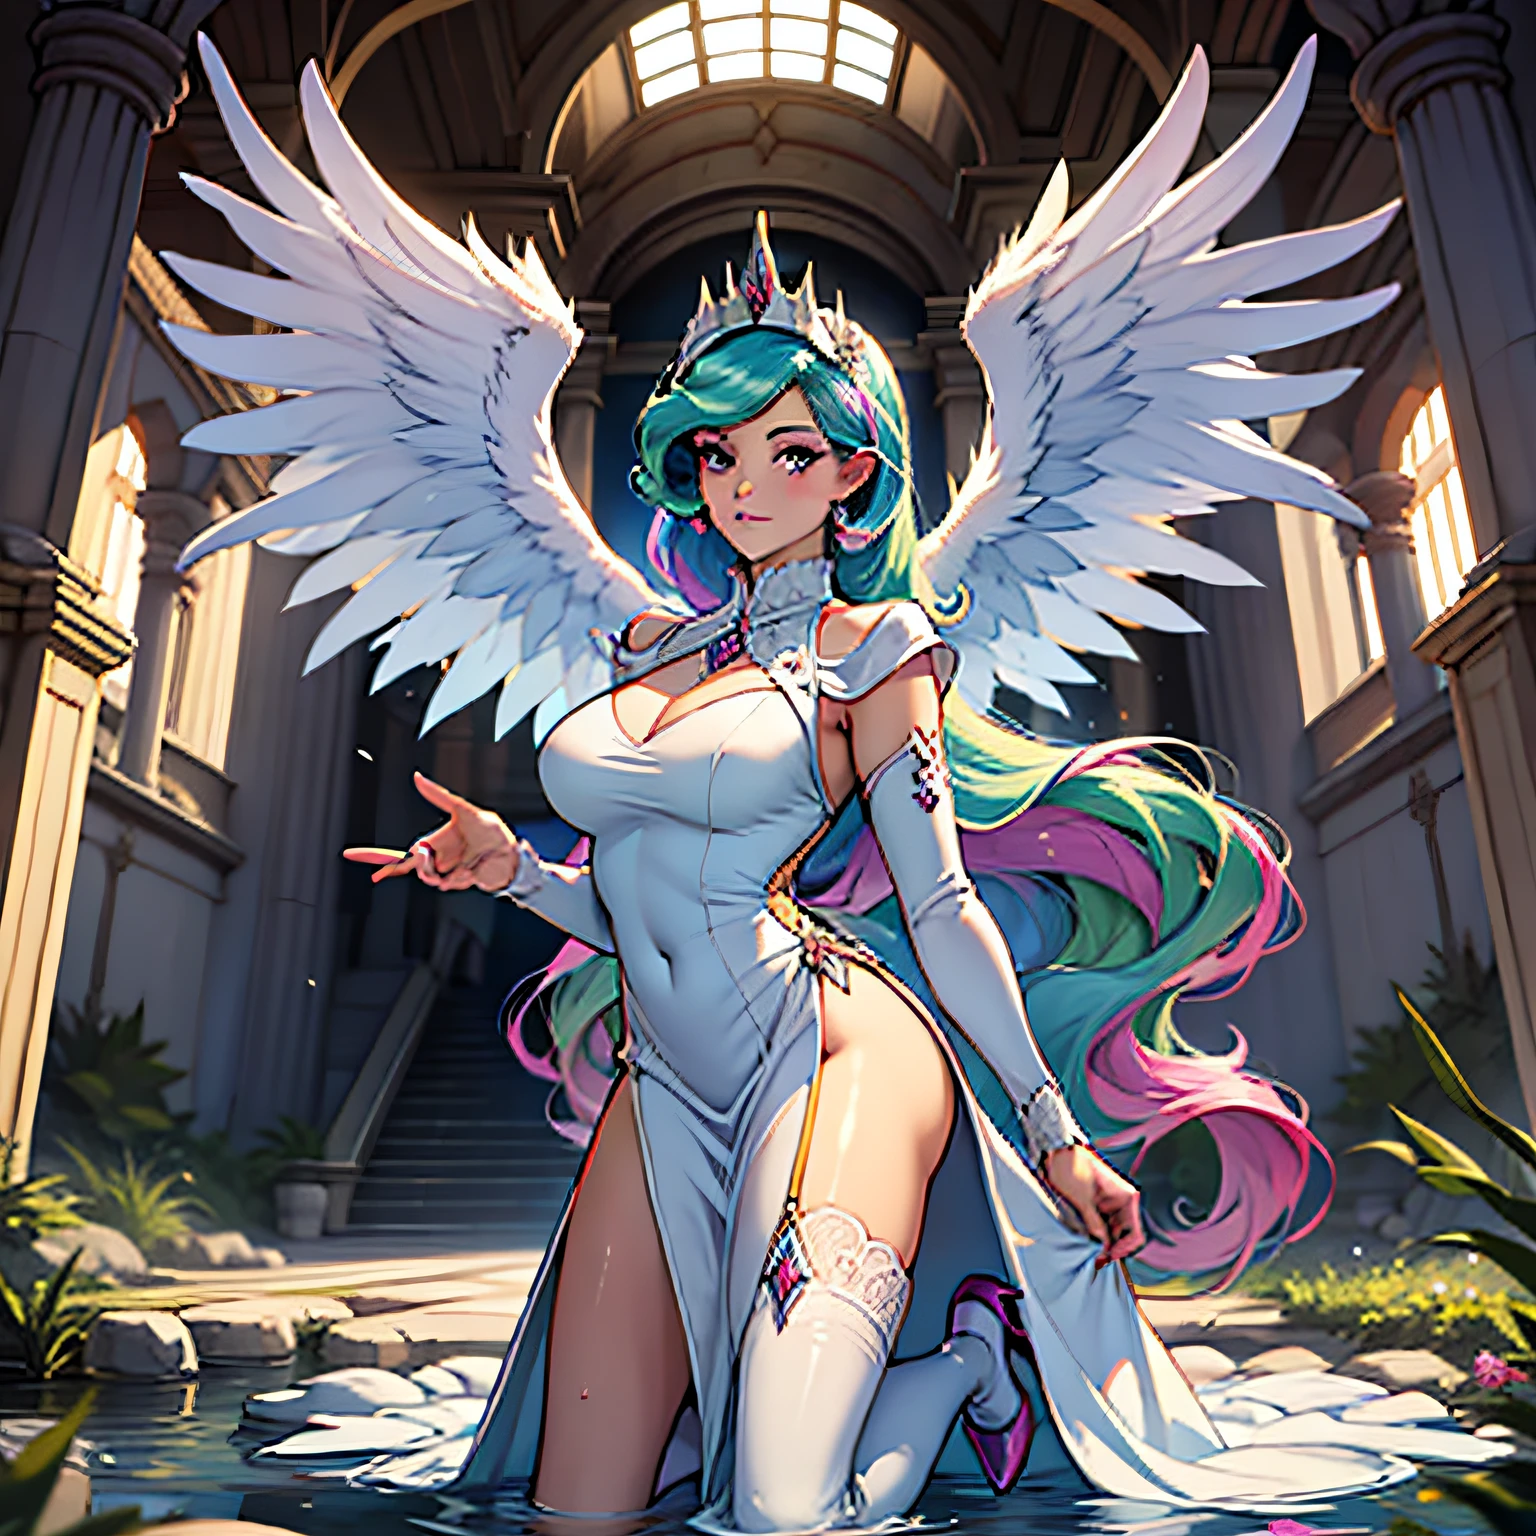 Celestiahuman, Princess Celestia from my little pony, Princess Celestia in the form of a girl, big breasts, lush breasts, voluminous breasts, elastic breasts, you can see the whole body, shin, heels, feet, five fingers, detailed hands, Big white angel wings behind the back, white feathers, thin lace white dress, the dress is wet, translucent, stands against the background of the palace, stands straight, white knee-high boots, palace in the mountain, waterfall from the palace, dawn, white feathers flying, palace far away